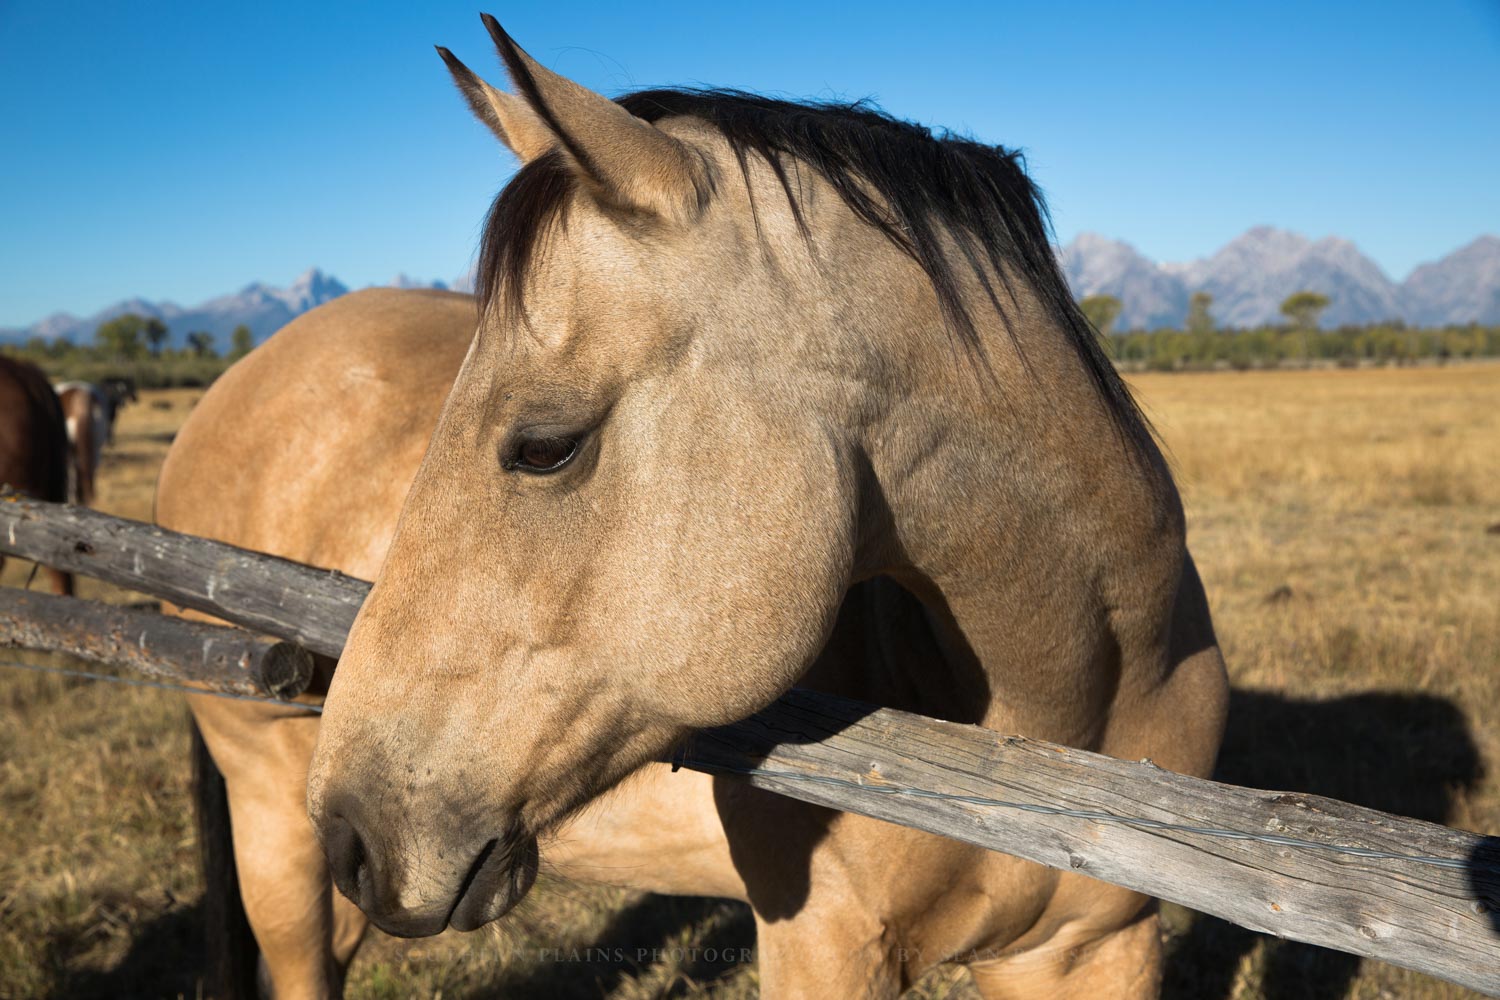 Equine photography print of a buckskin horse on an autumn day in Grand Teton National Park, Wyoming.